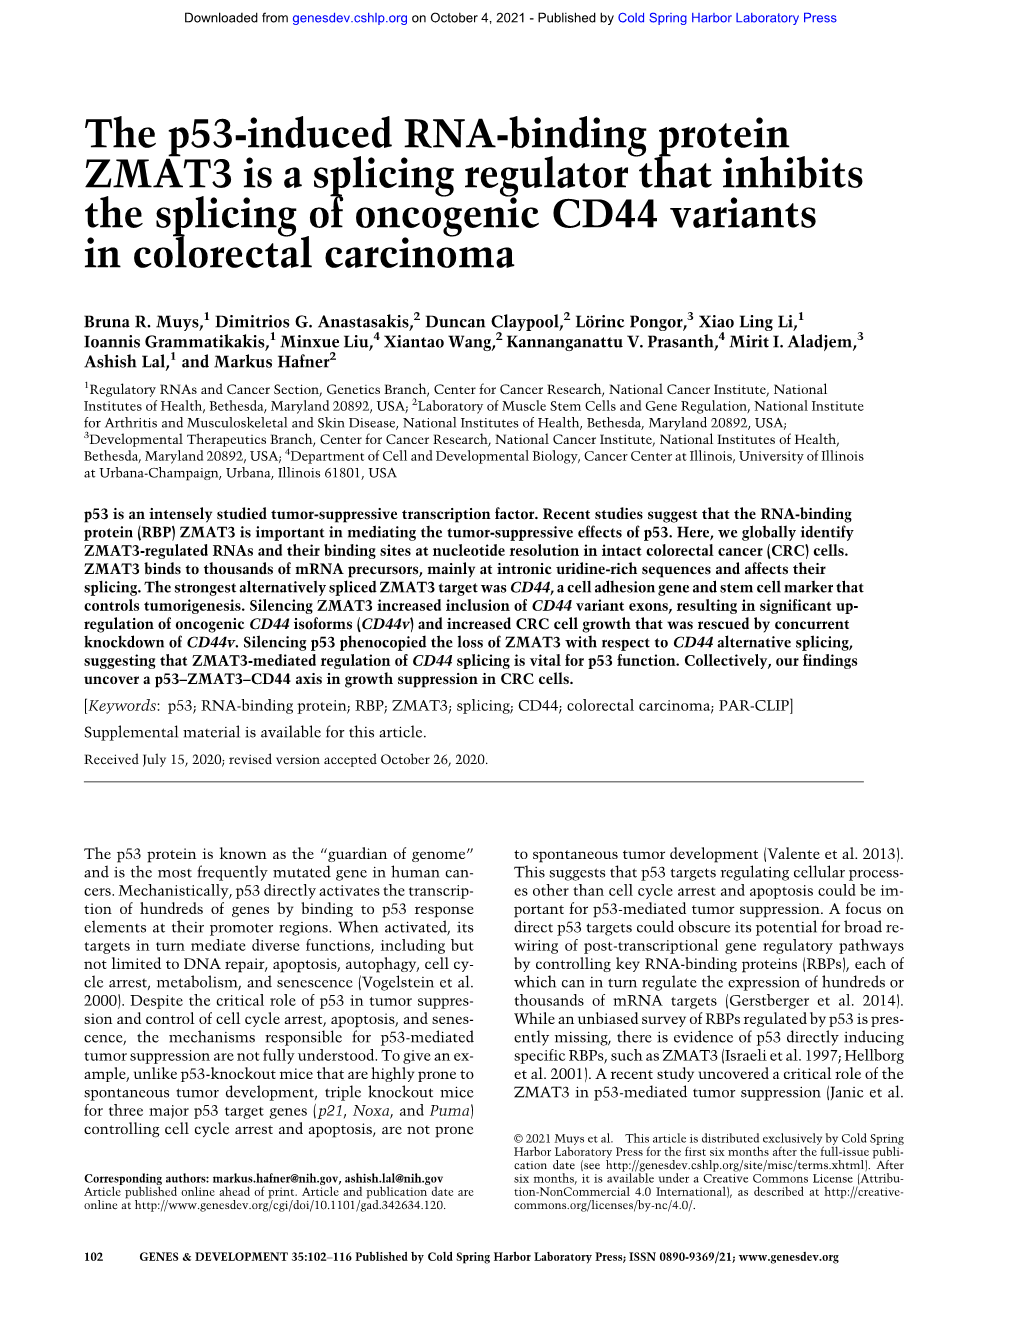 The P53-Induced RNA-Binding Protein ZMAT3 Is a Splicing Regulator That Inhibits the Splicing of Oncogenic CD44 Variants in Colorectal Carcinoma